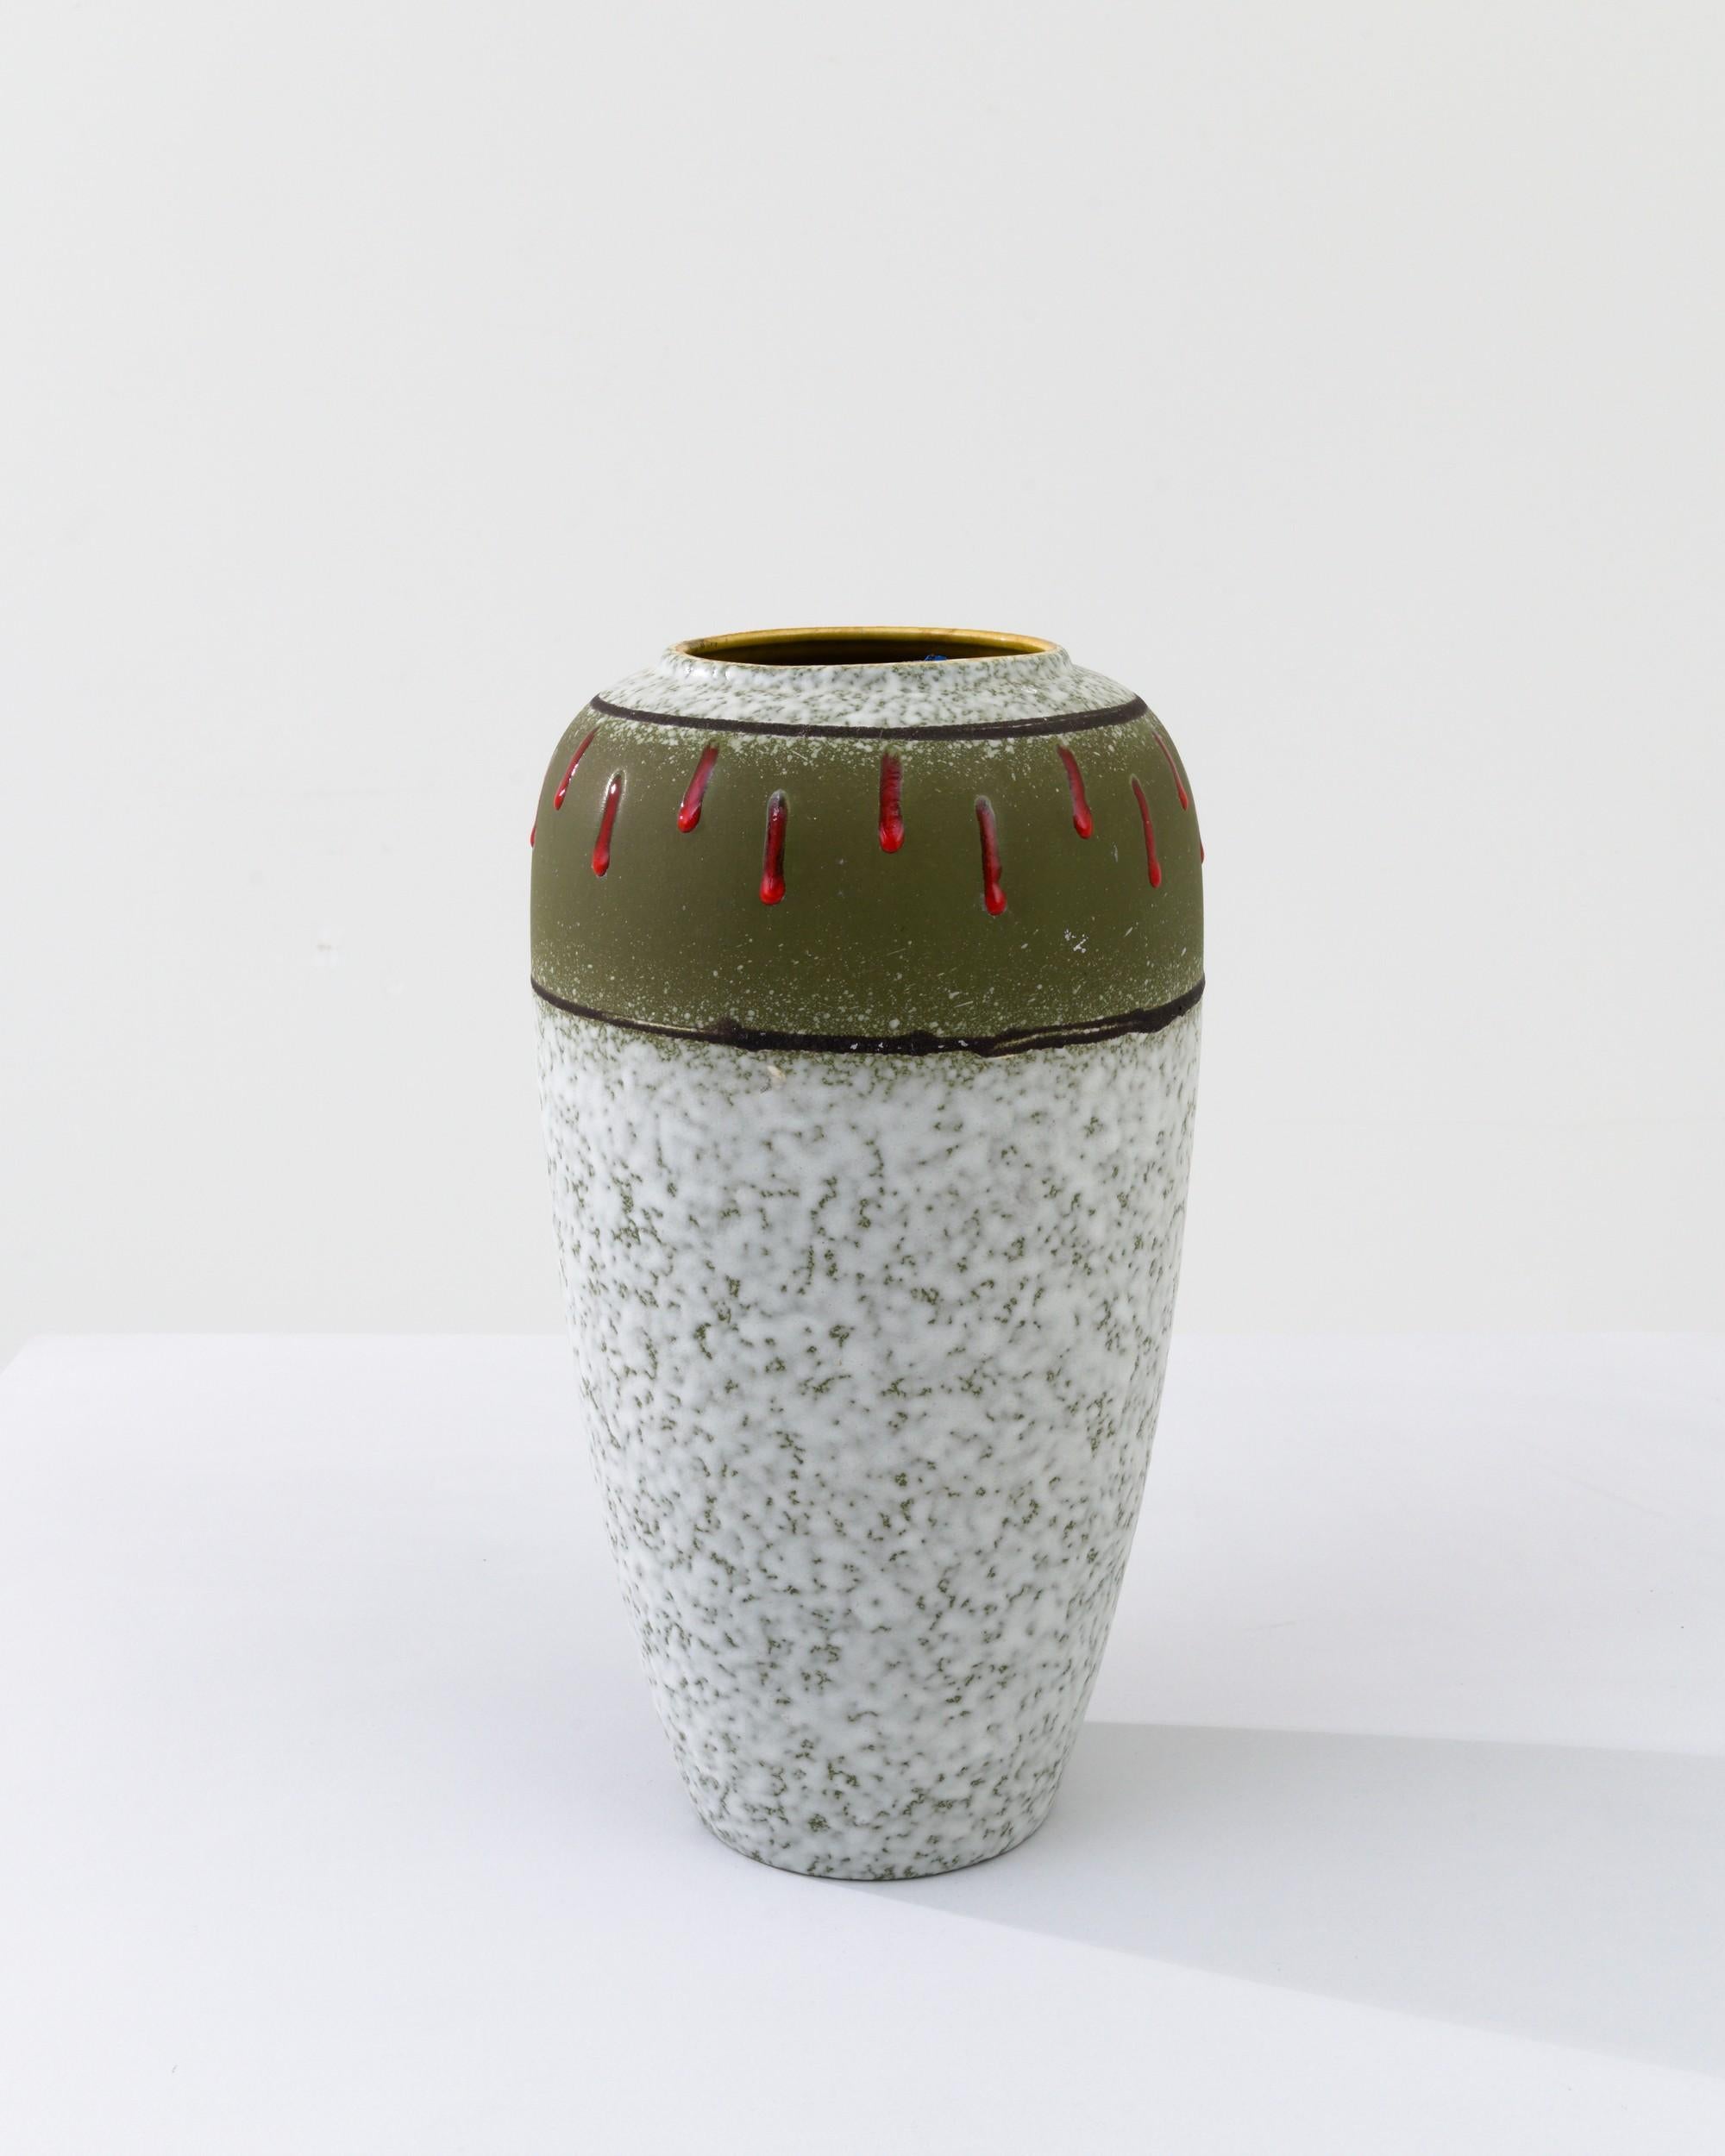 A ceramic vase from mid-20th century Germany. Neither large nor small, this studio made pot reflects the hand-held, and the handmade; the tactility of process and the artist's vision– realized on the potter’s wheel. Layered tones create a unique